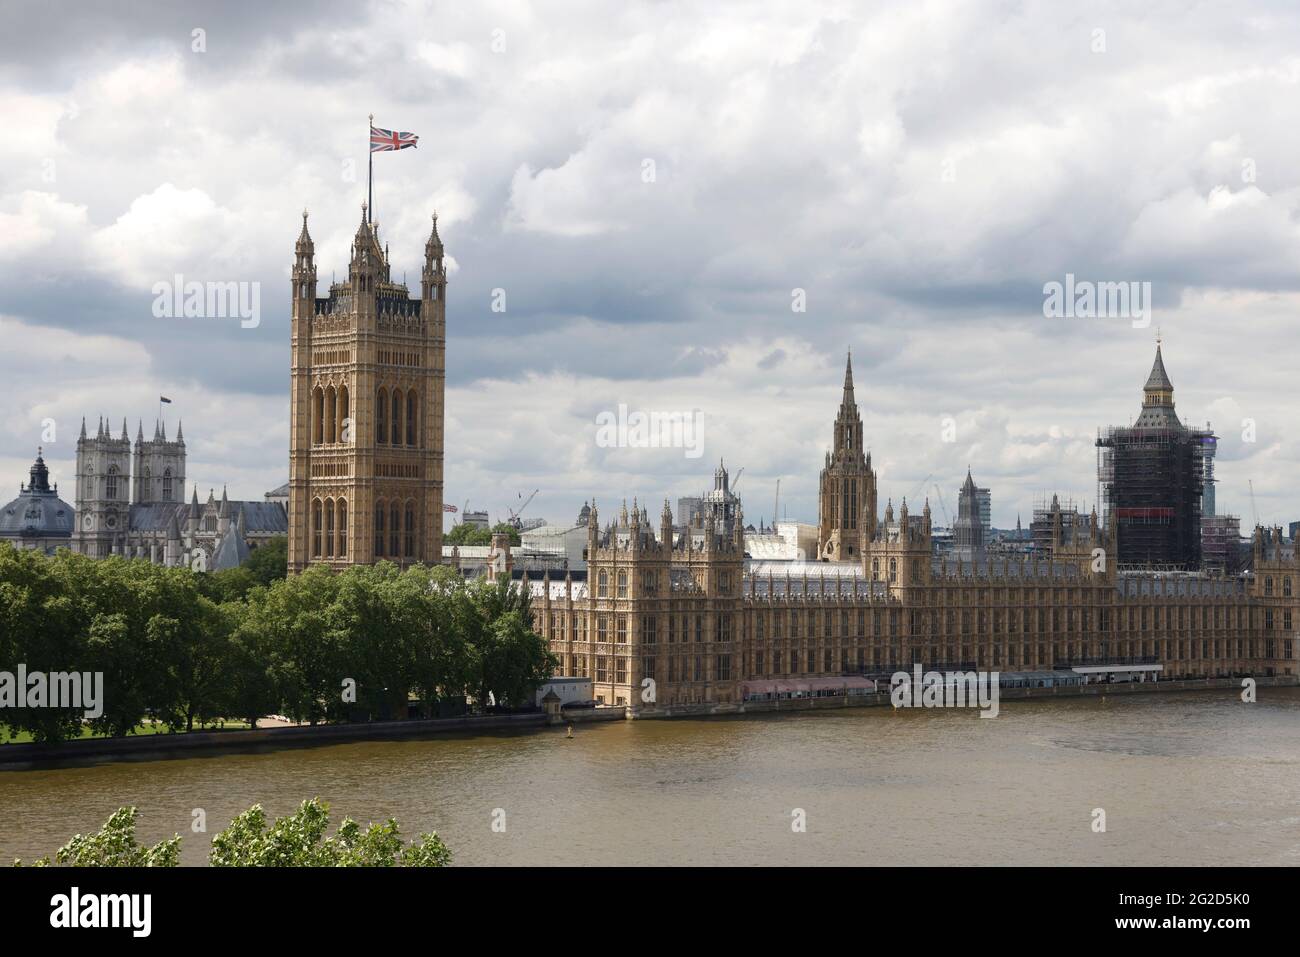 View of the River Thames and the Houses of Parliament including the Elizabeth Tower also known as Big Ben under scaffolding. Stock Photo